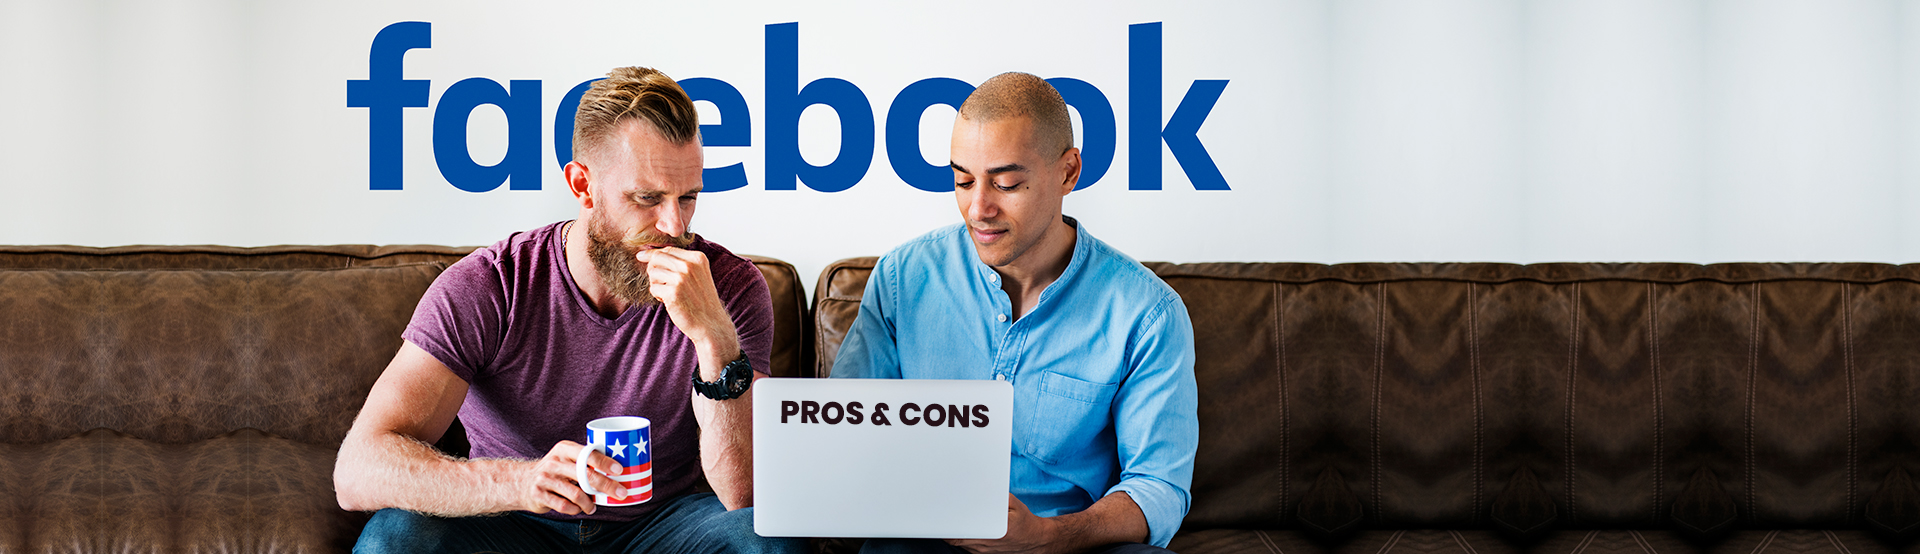 Facebook Pros And Cons